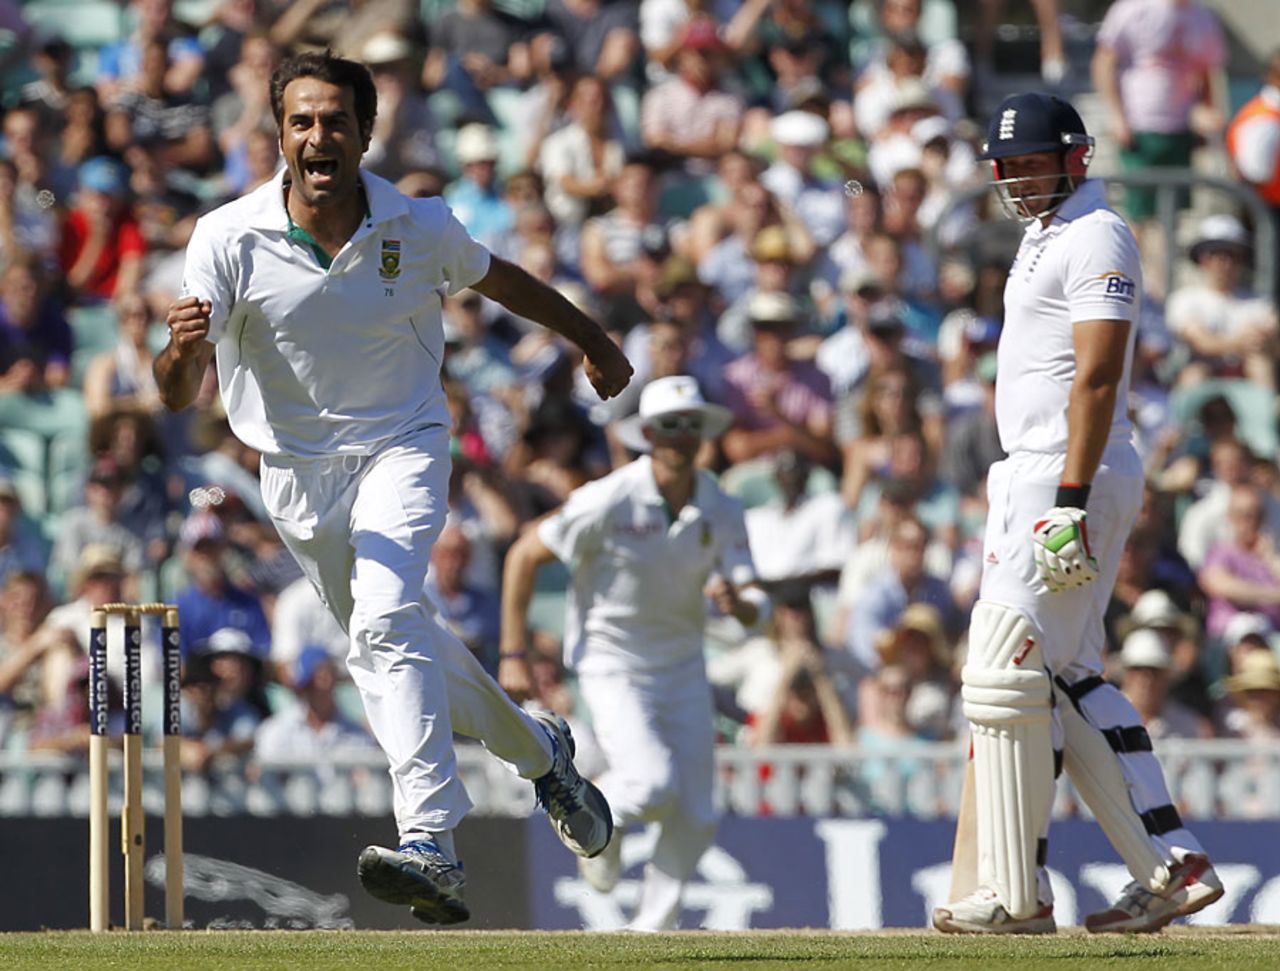 Imran Tahir claimed the final wicket when James Anderson was lbw, England v South Africa, 1st Test, The Oval, 5th day, July 23, 2012